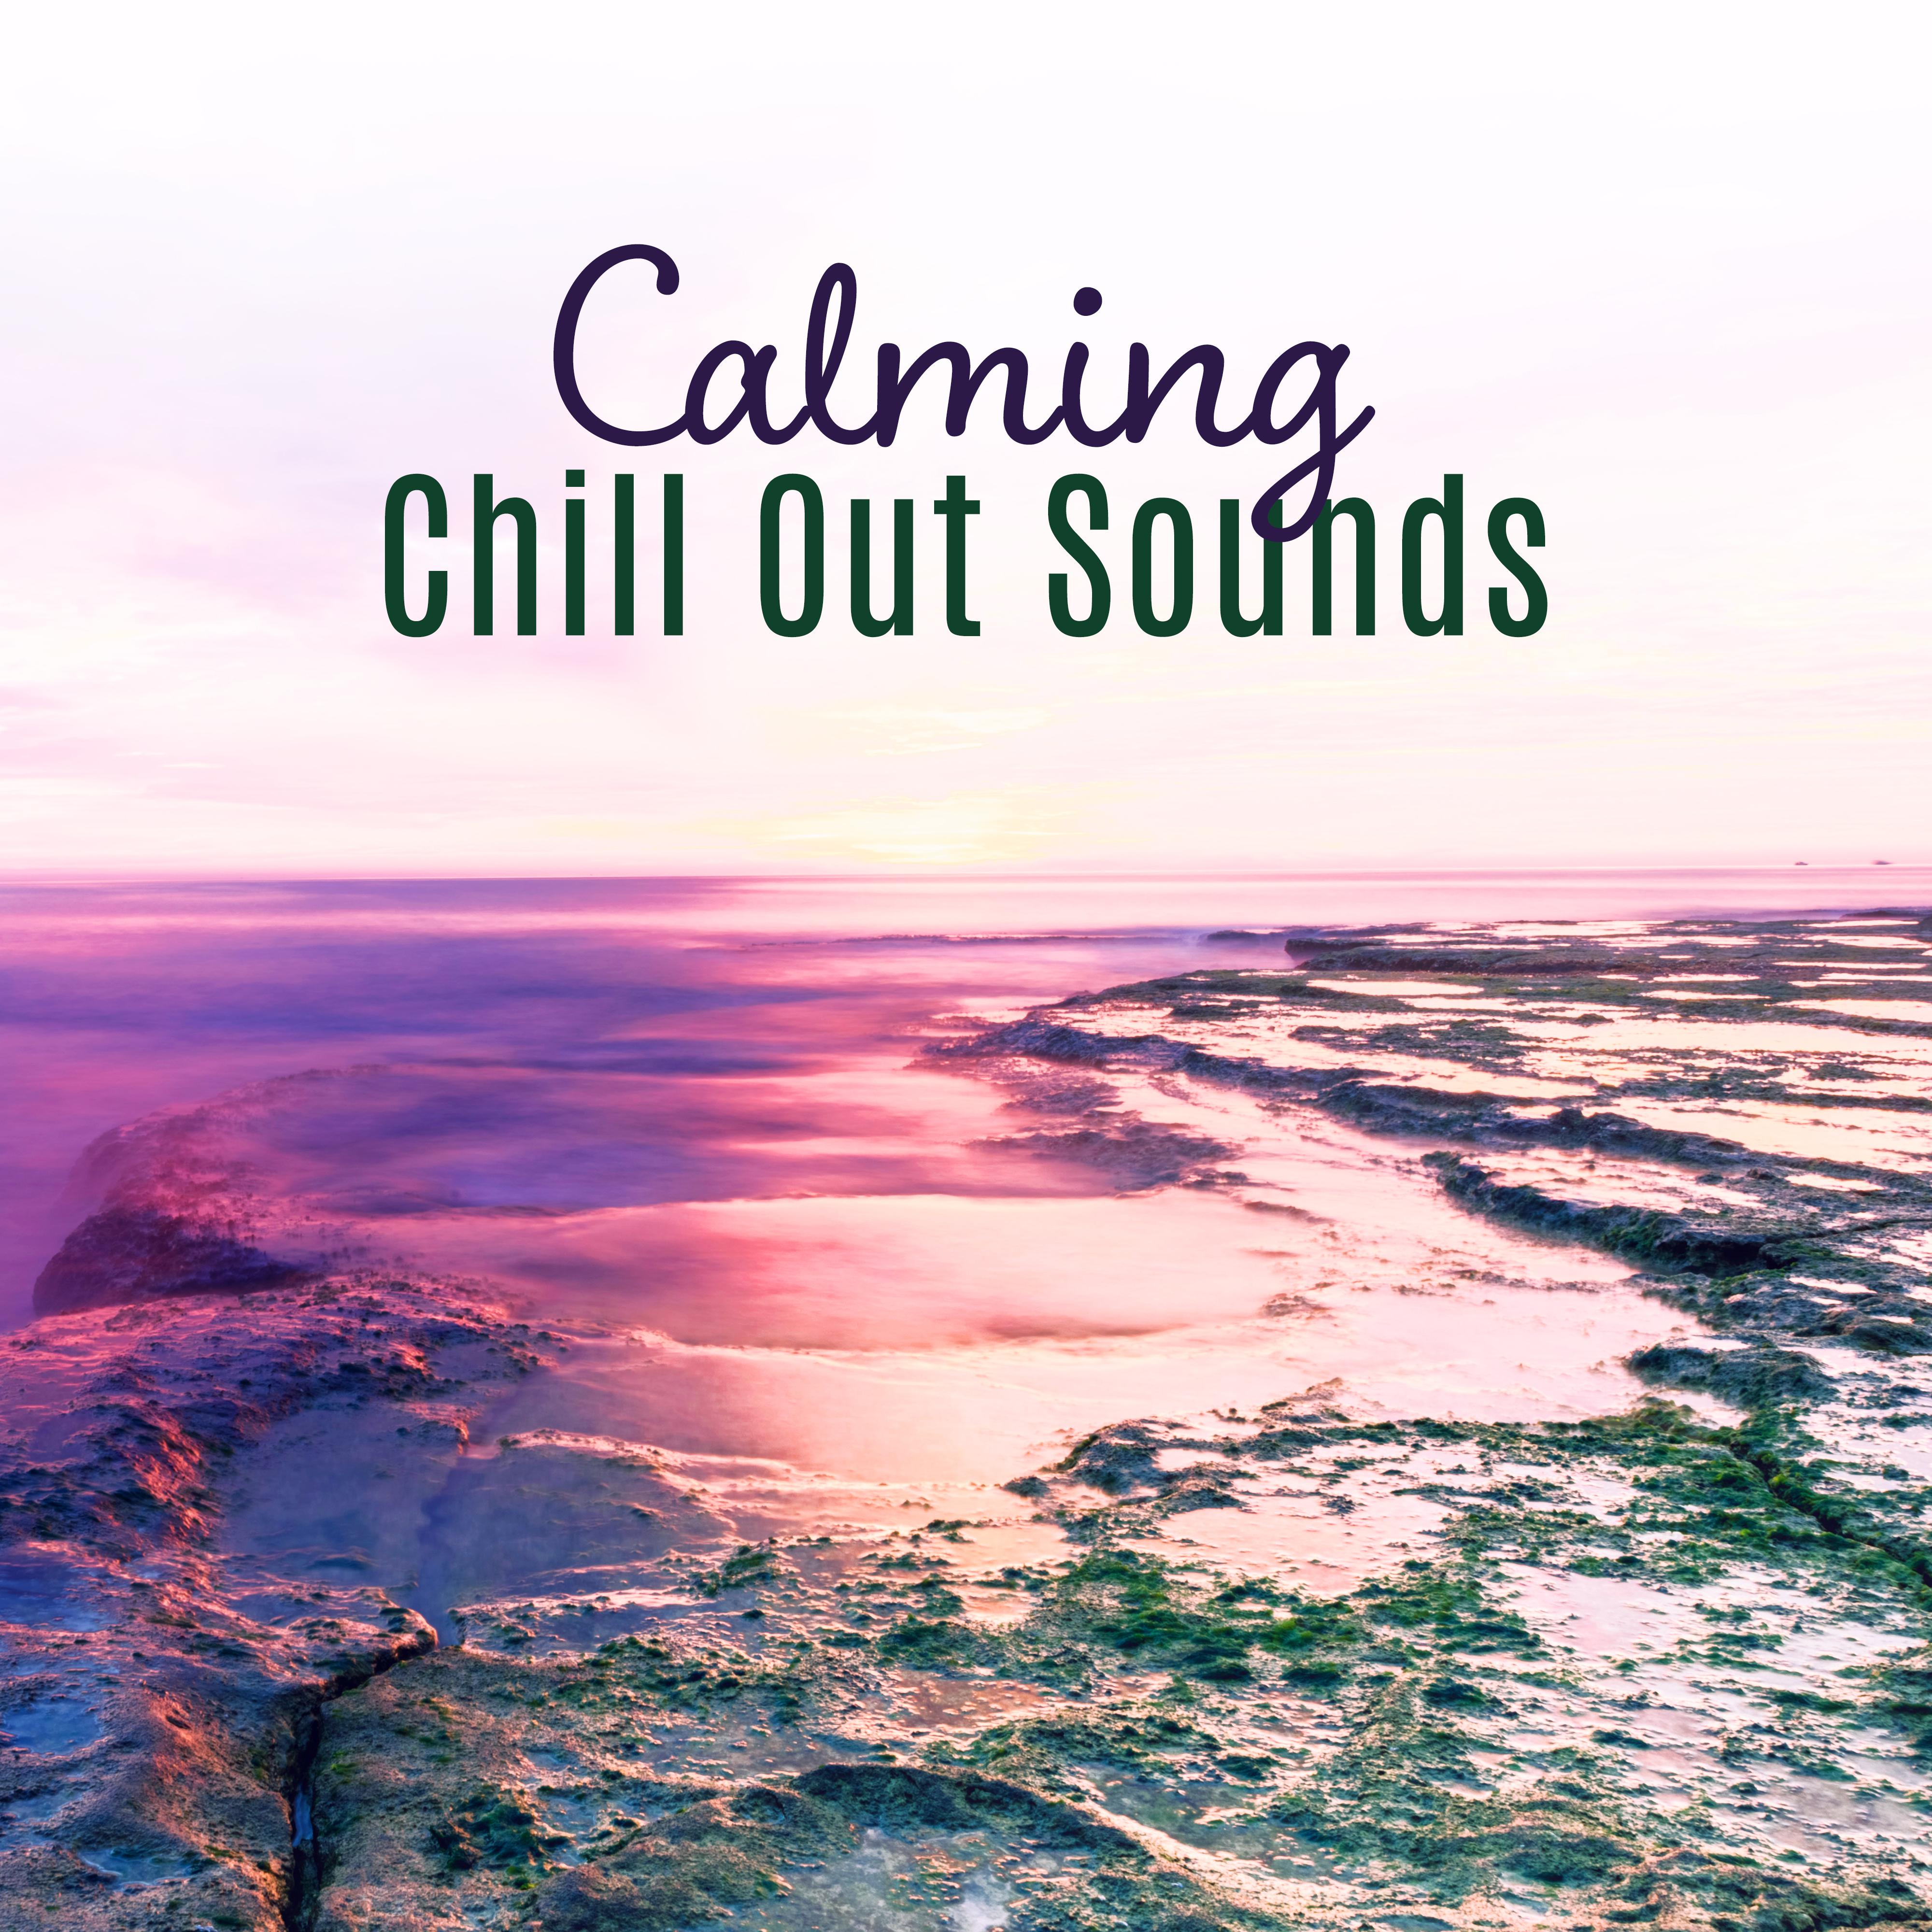 Calming Chill Out Sounds  Stress Relief, Music to Calm Down, Peaceful Waves, Summer 2017